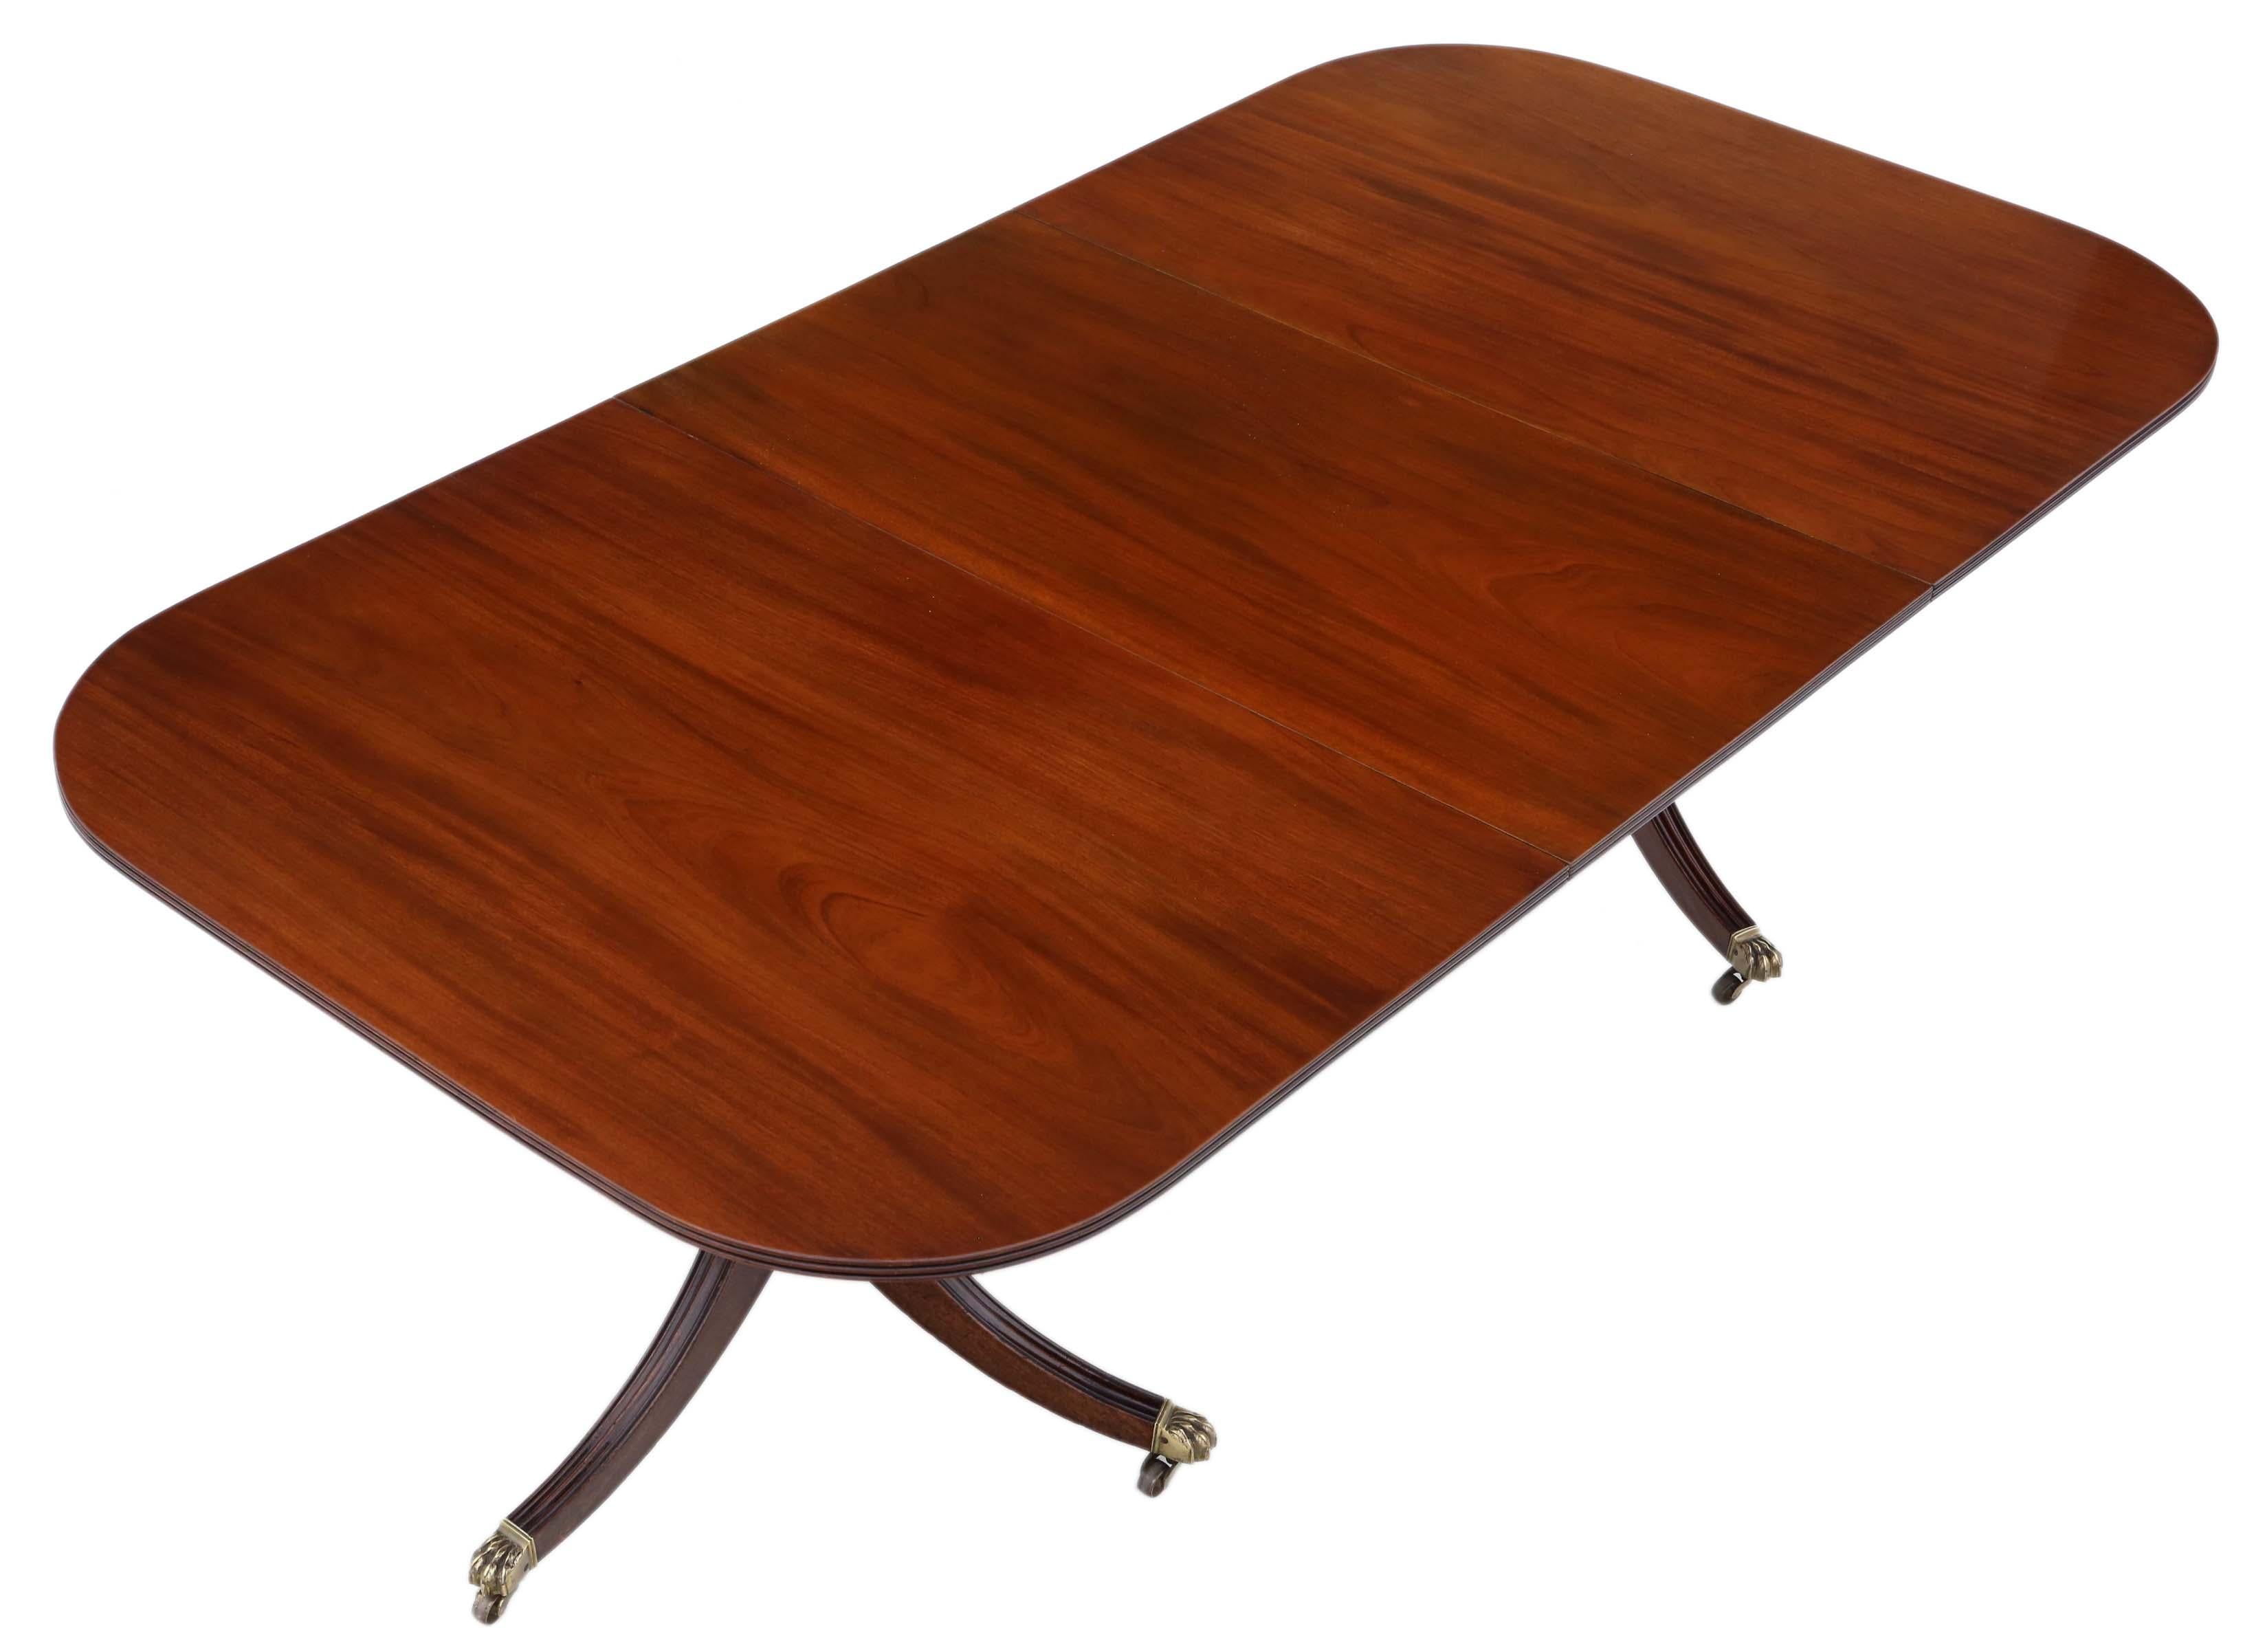 Regency Antique Large Fine Quality Mahogany Extending Twin Pedestal Dining Table, C1910